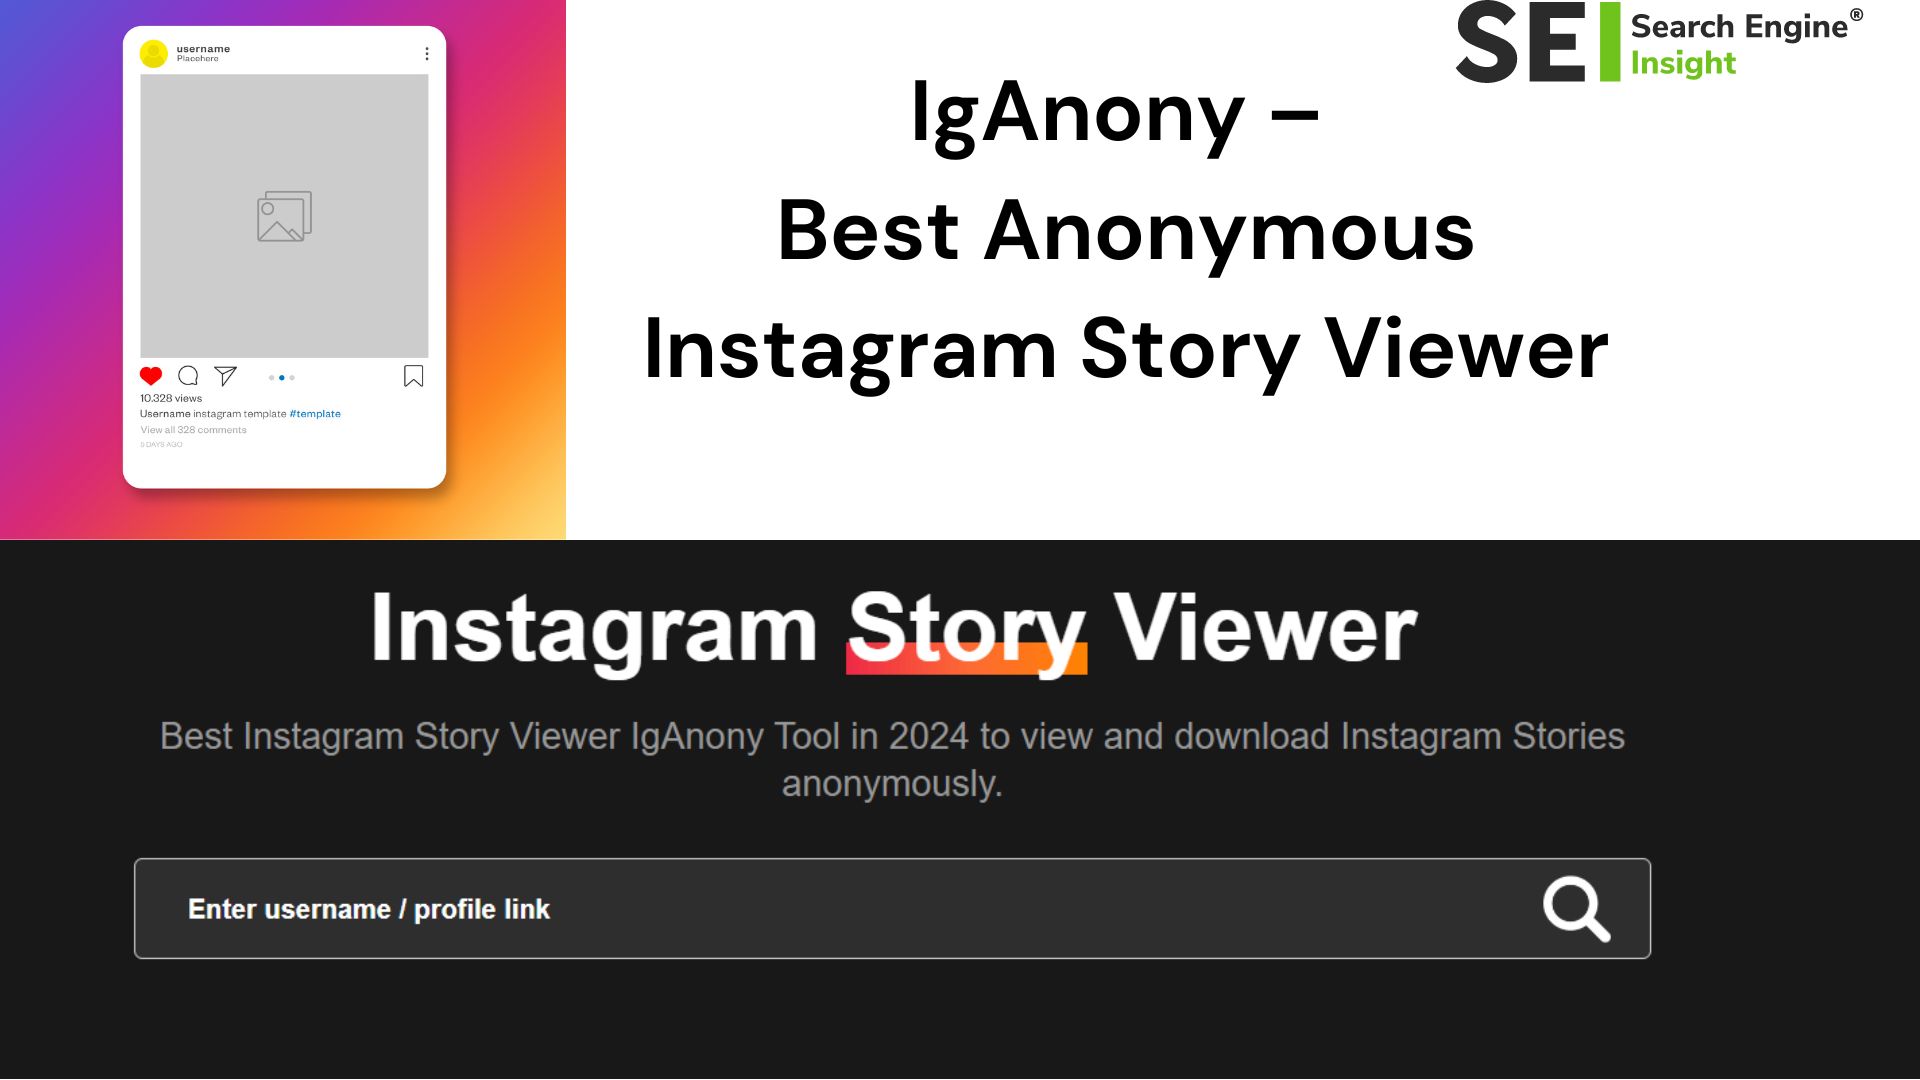 IgAnony – Best Anonymous Instagram Story Viewer